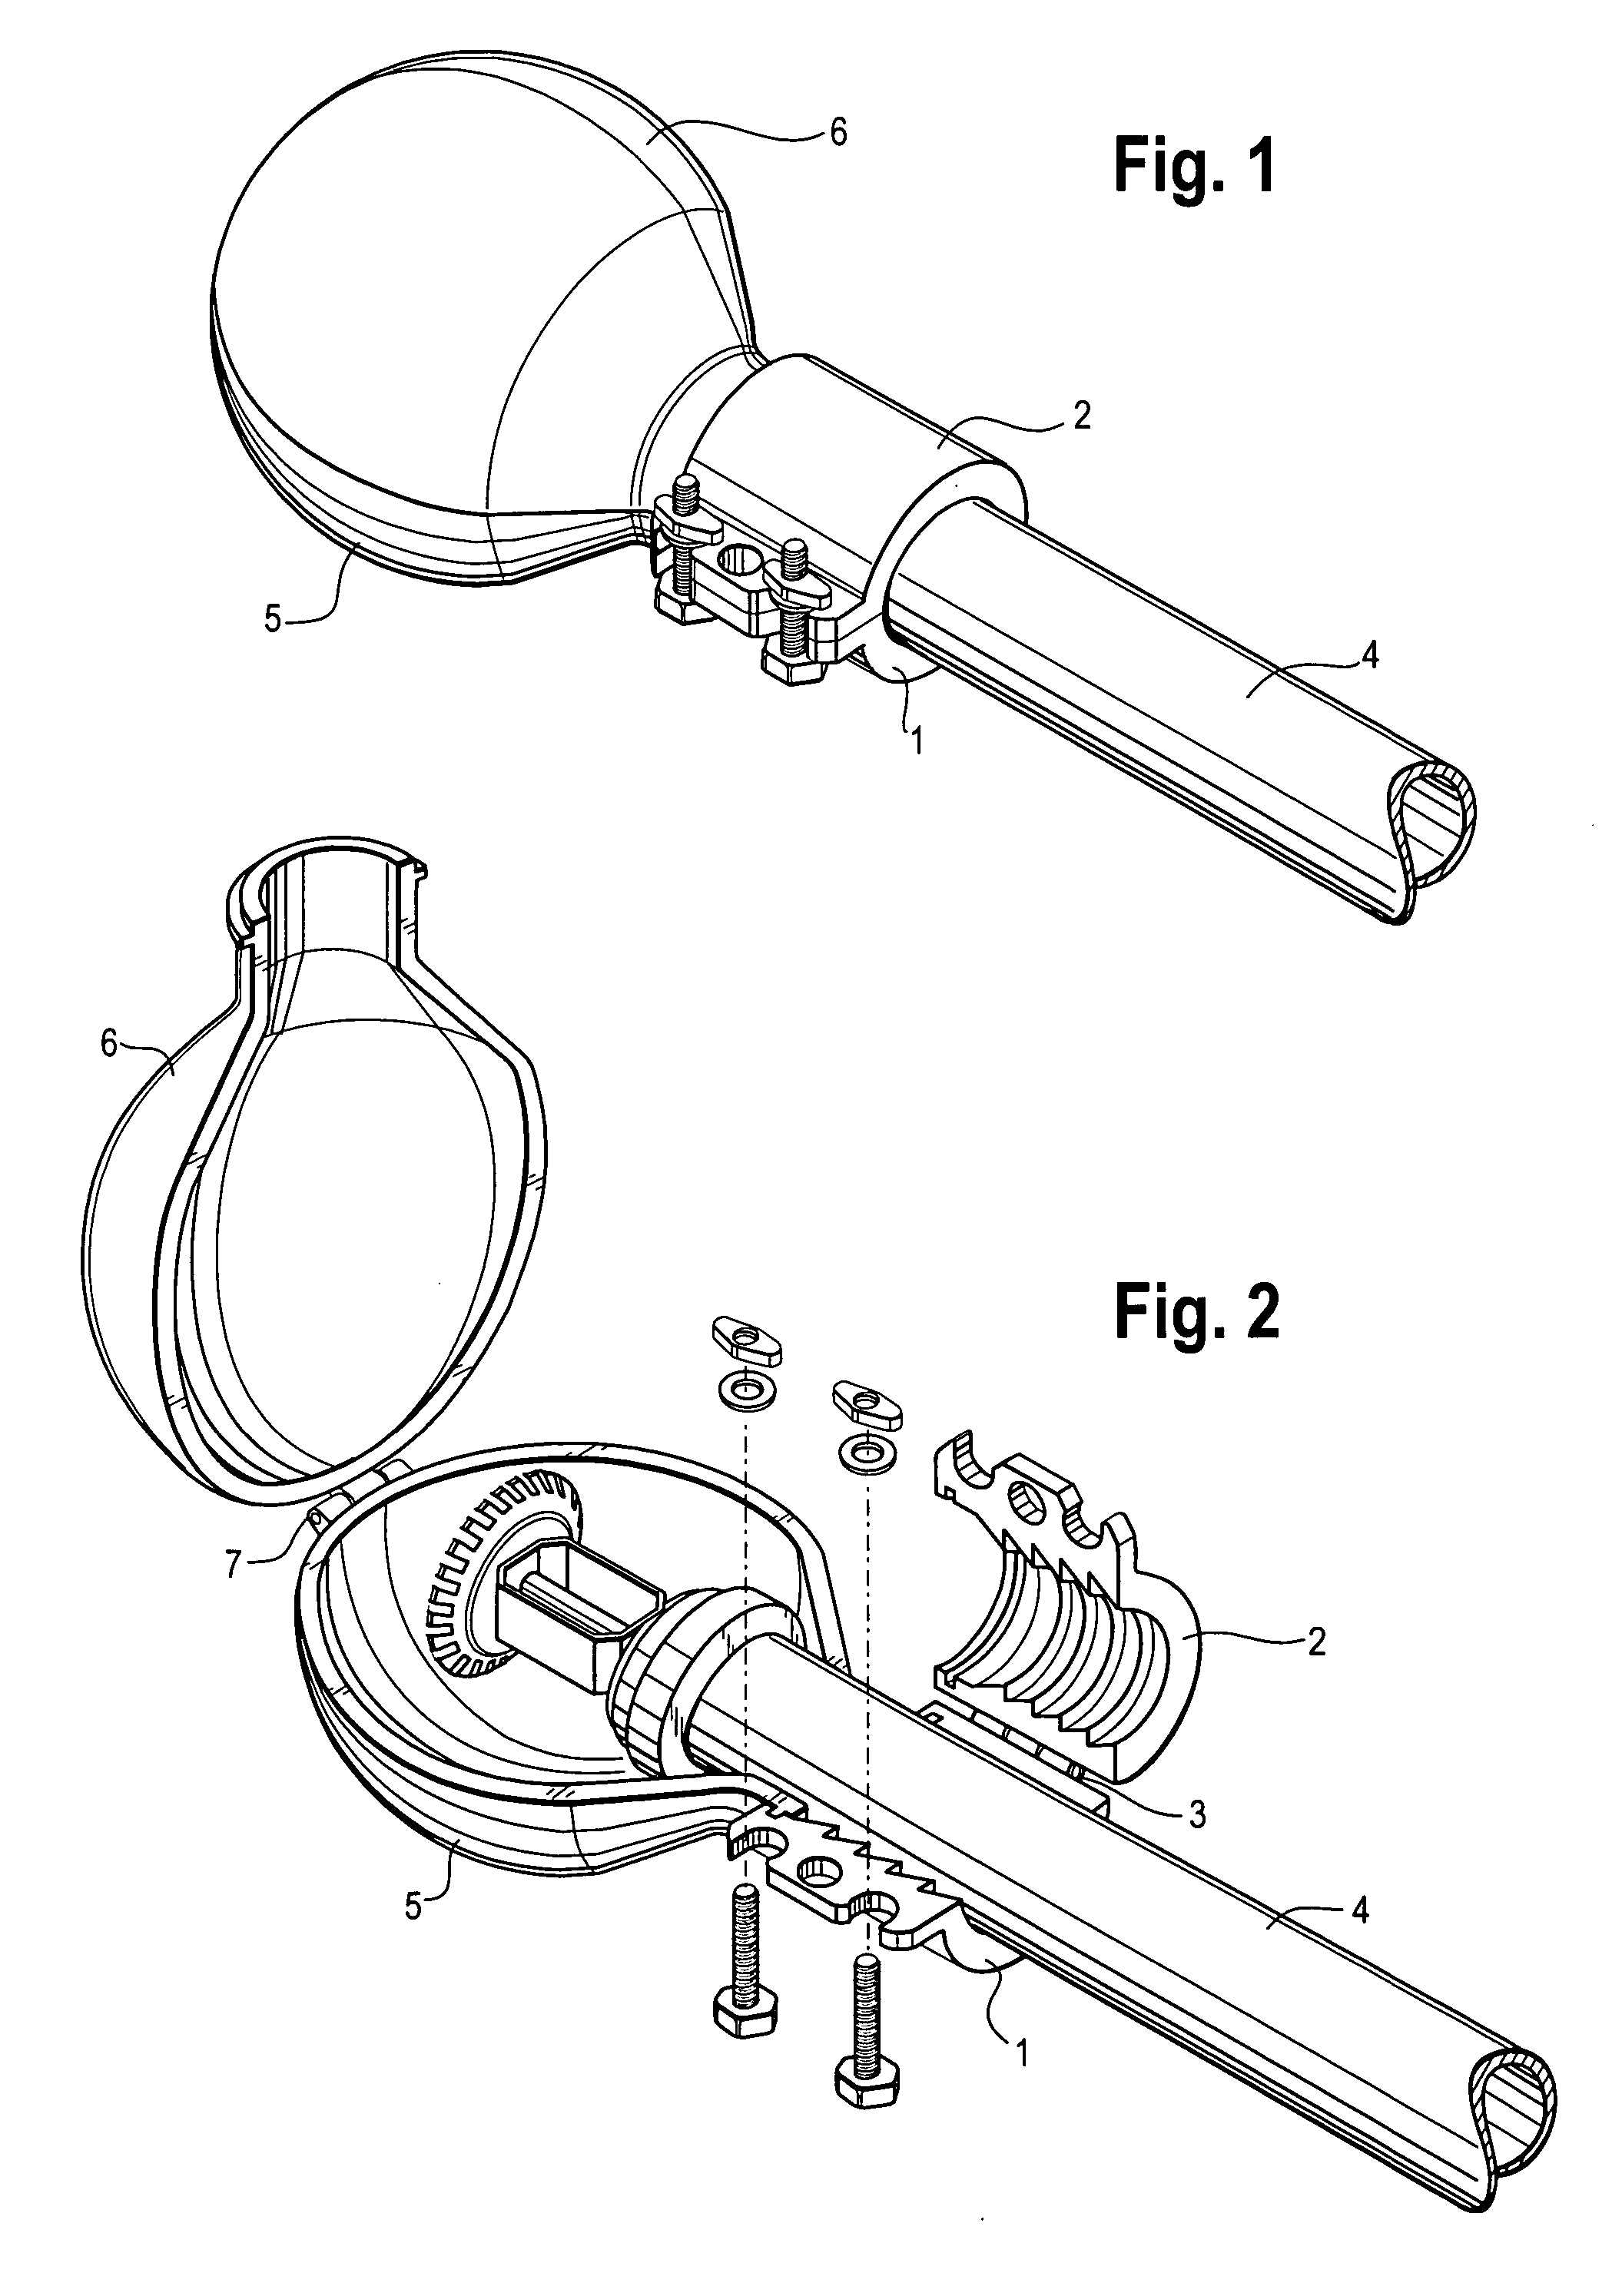 Method and apparatus for lock out-tag out of sprinkler heads